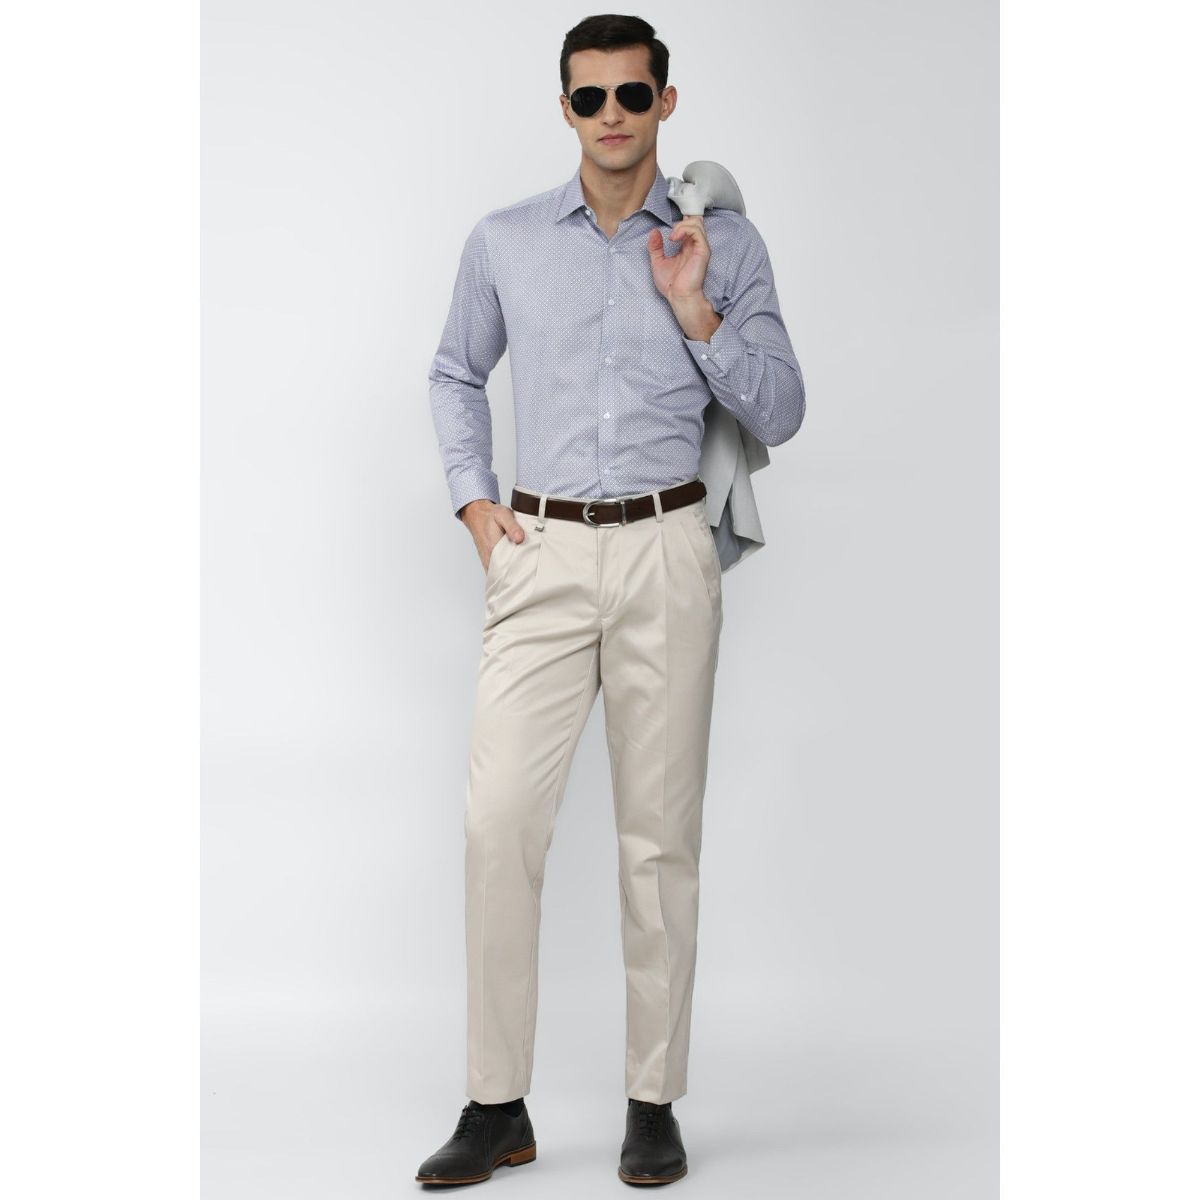 VAN HEUSEN Navy Trousers VWTFFRGFQ61734 - 32 in Mumbai at best price by  Lucky Shop - Justdial